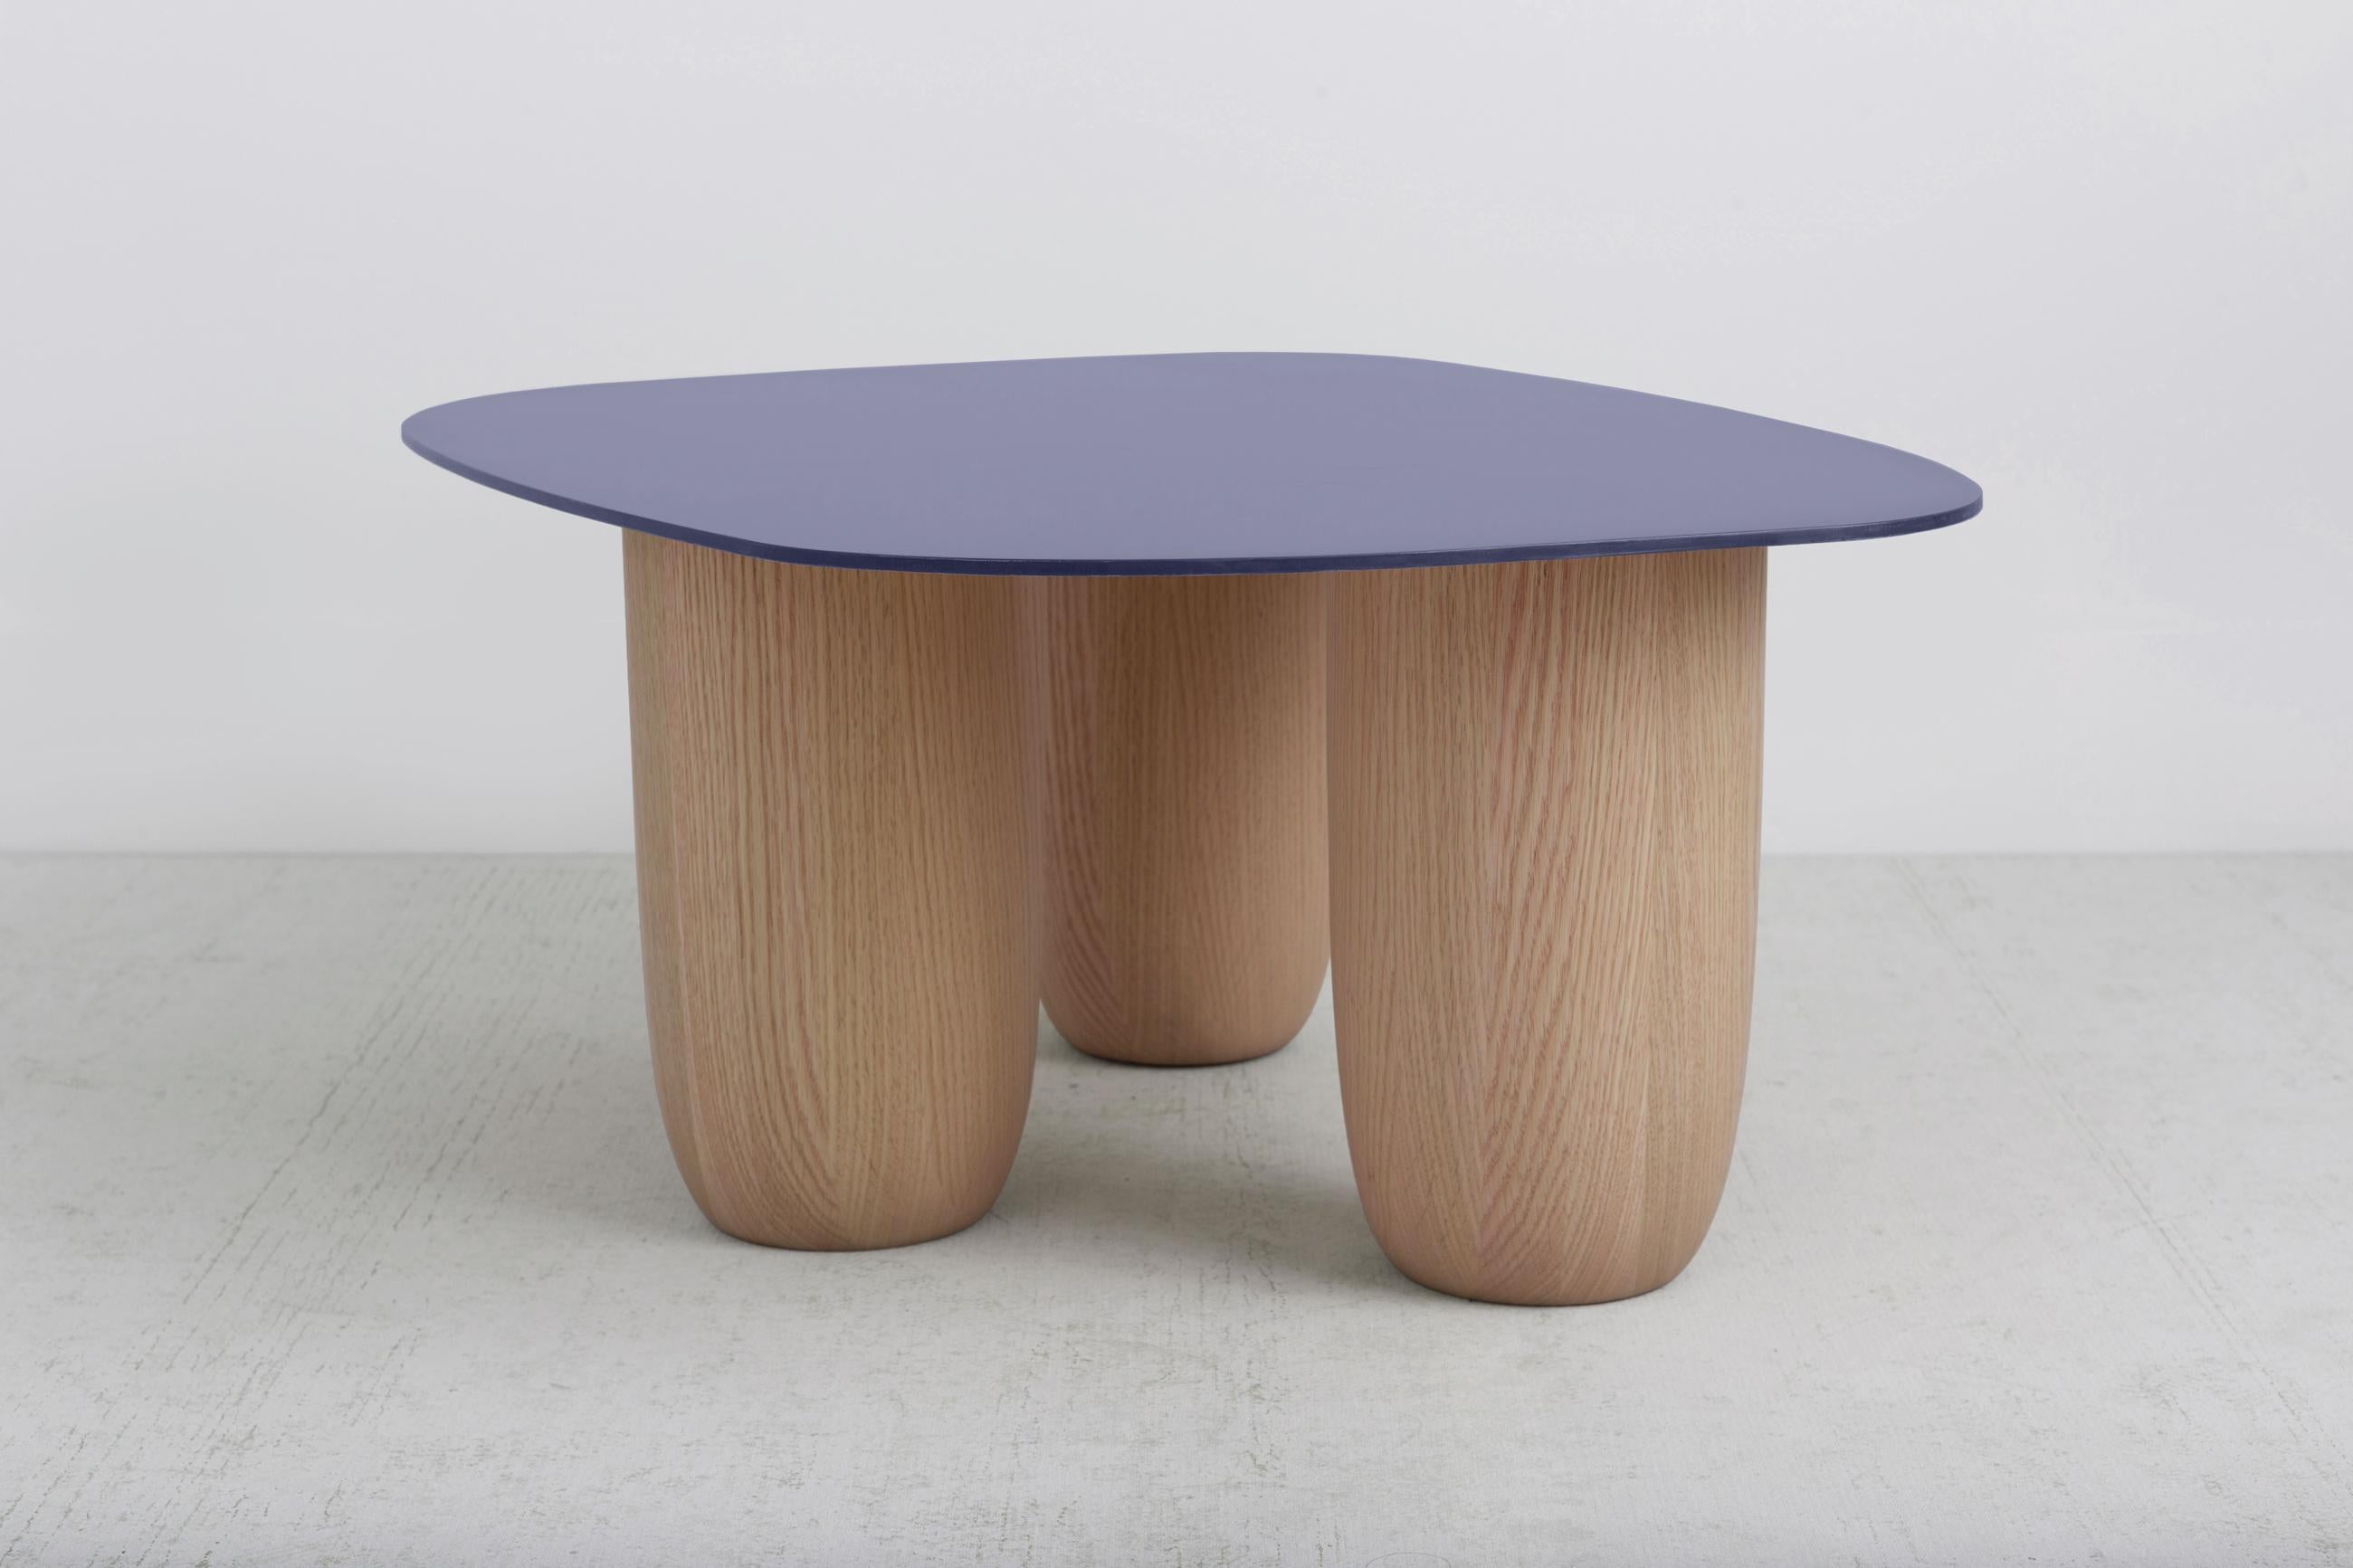 Powder-Coated Contemporary Low Table Blue Steel Top with Natural Oak Legs by Vivian Carbonell